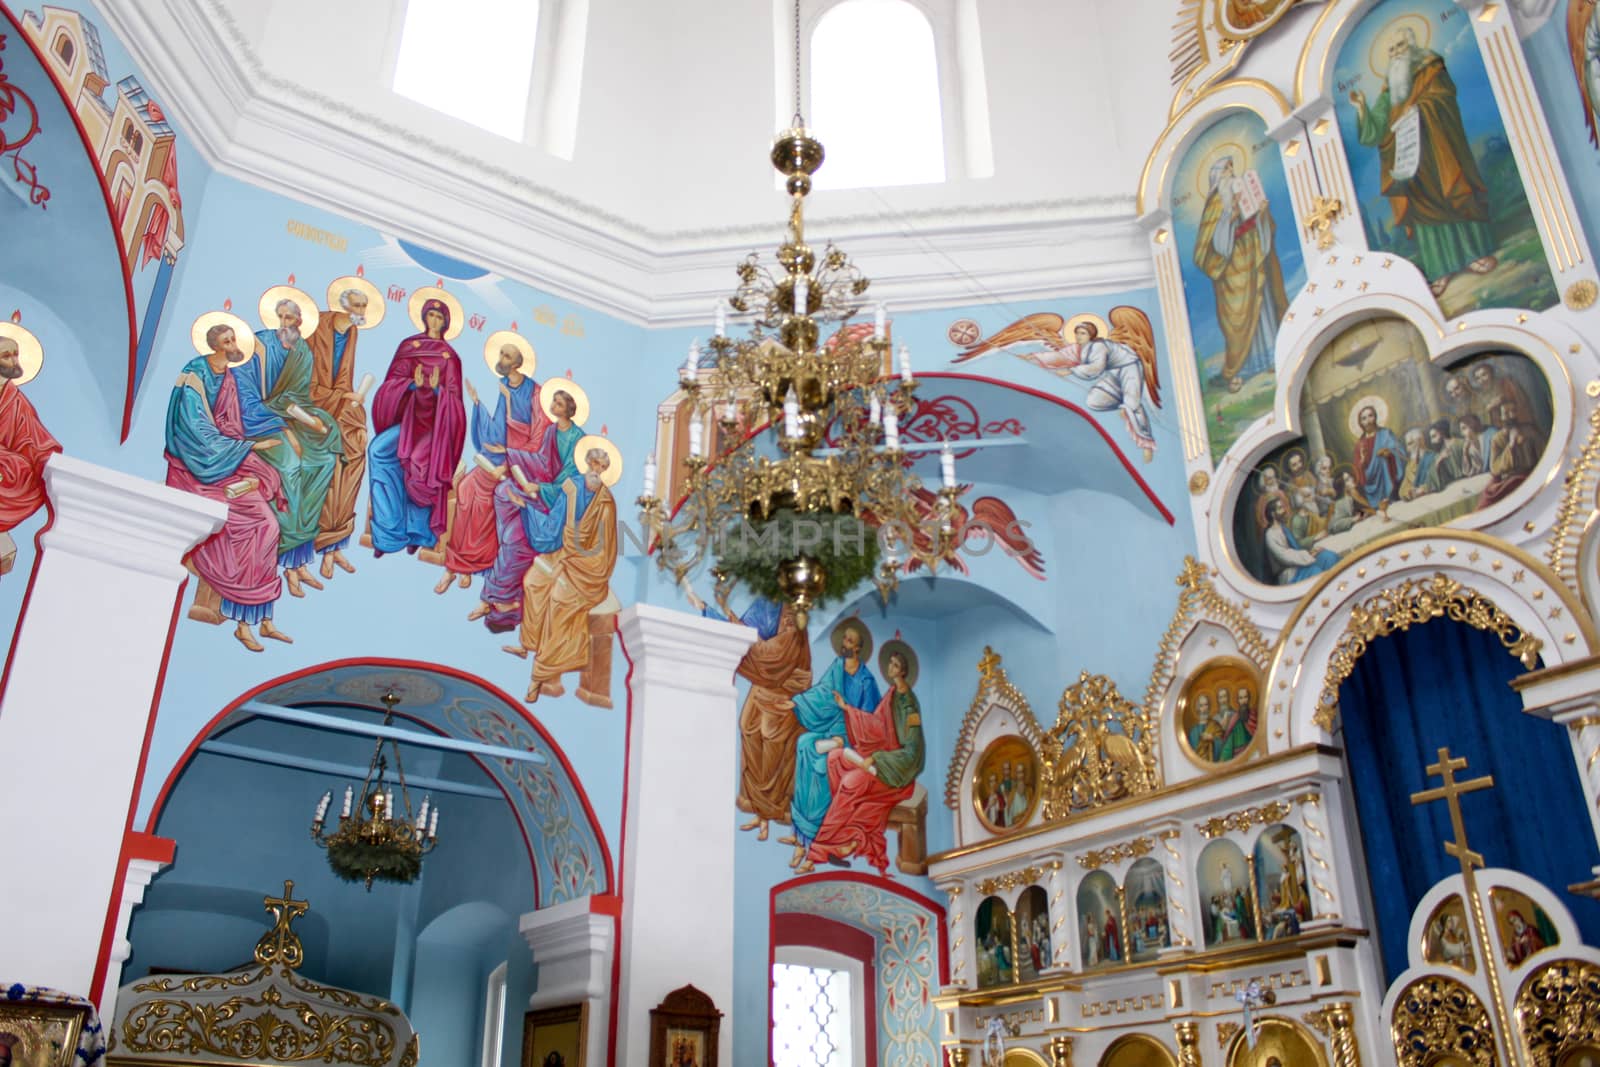 Beautiful paintings on the walls of the Orthodox Church